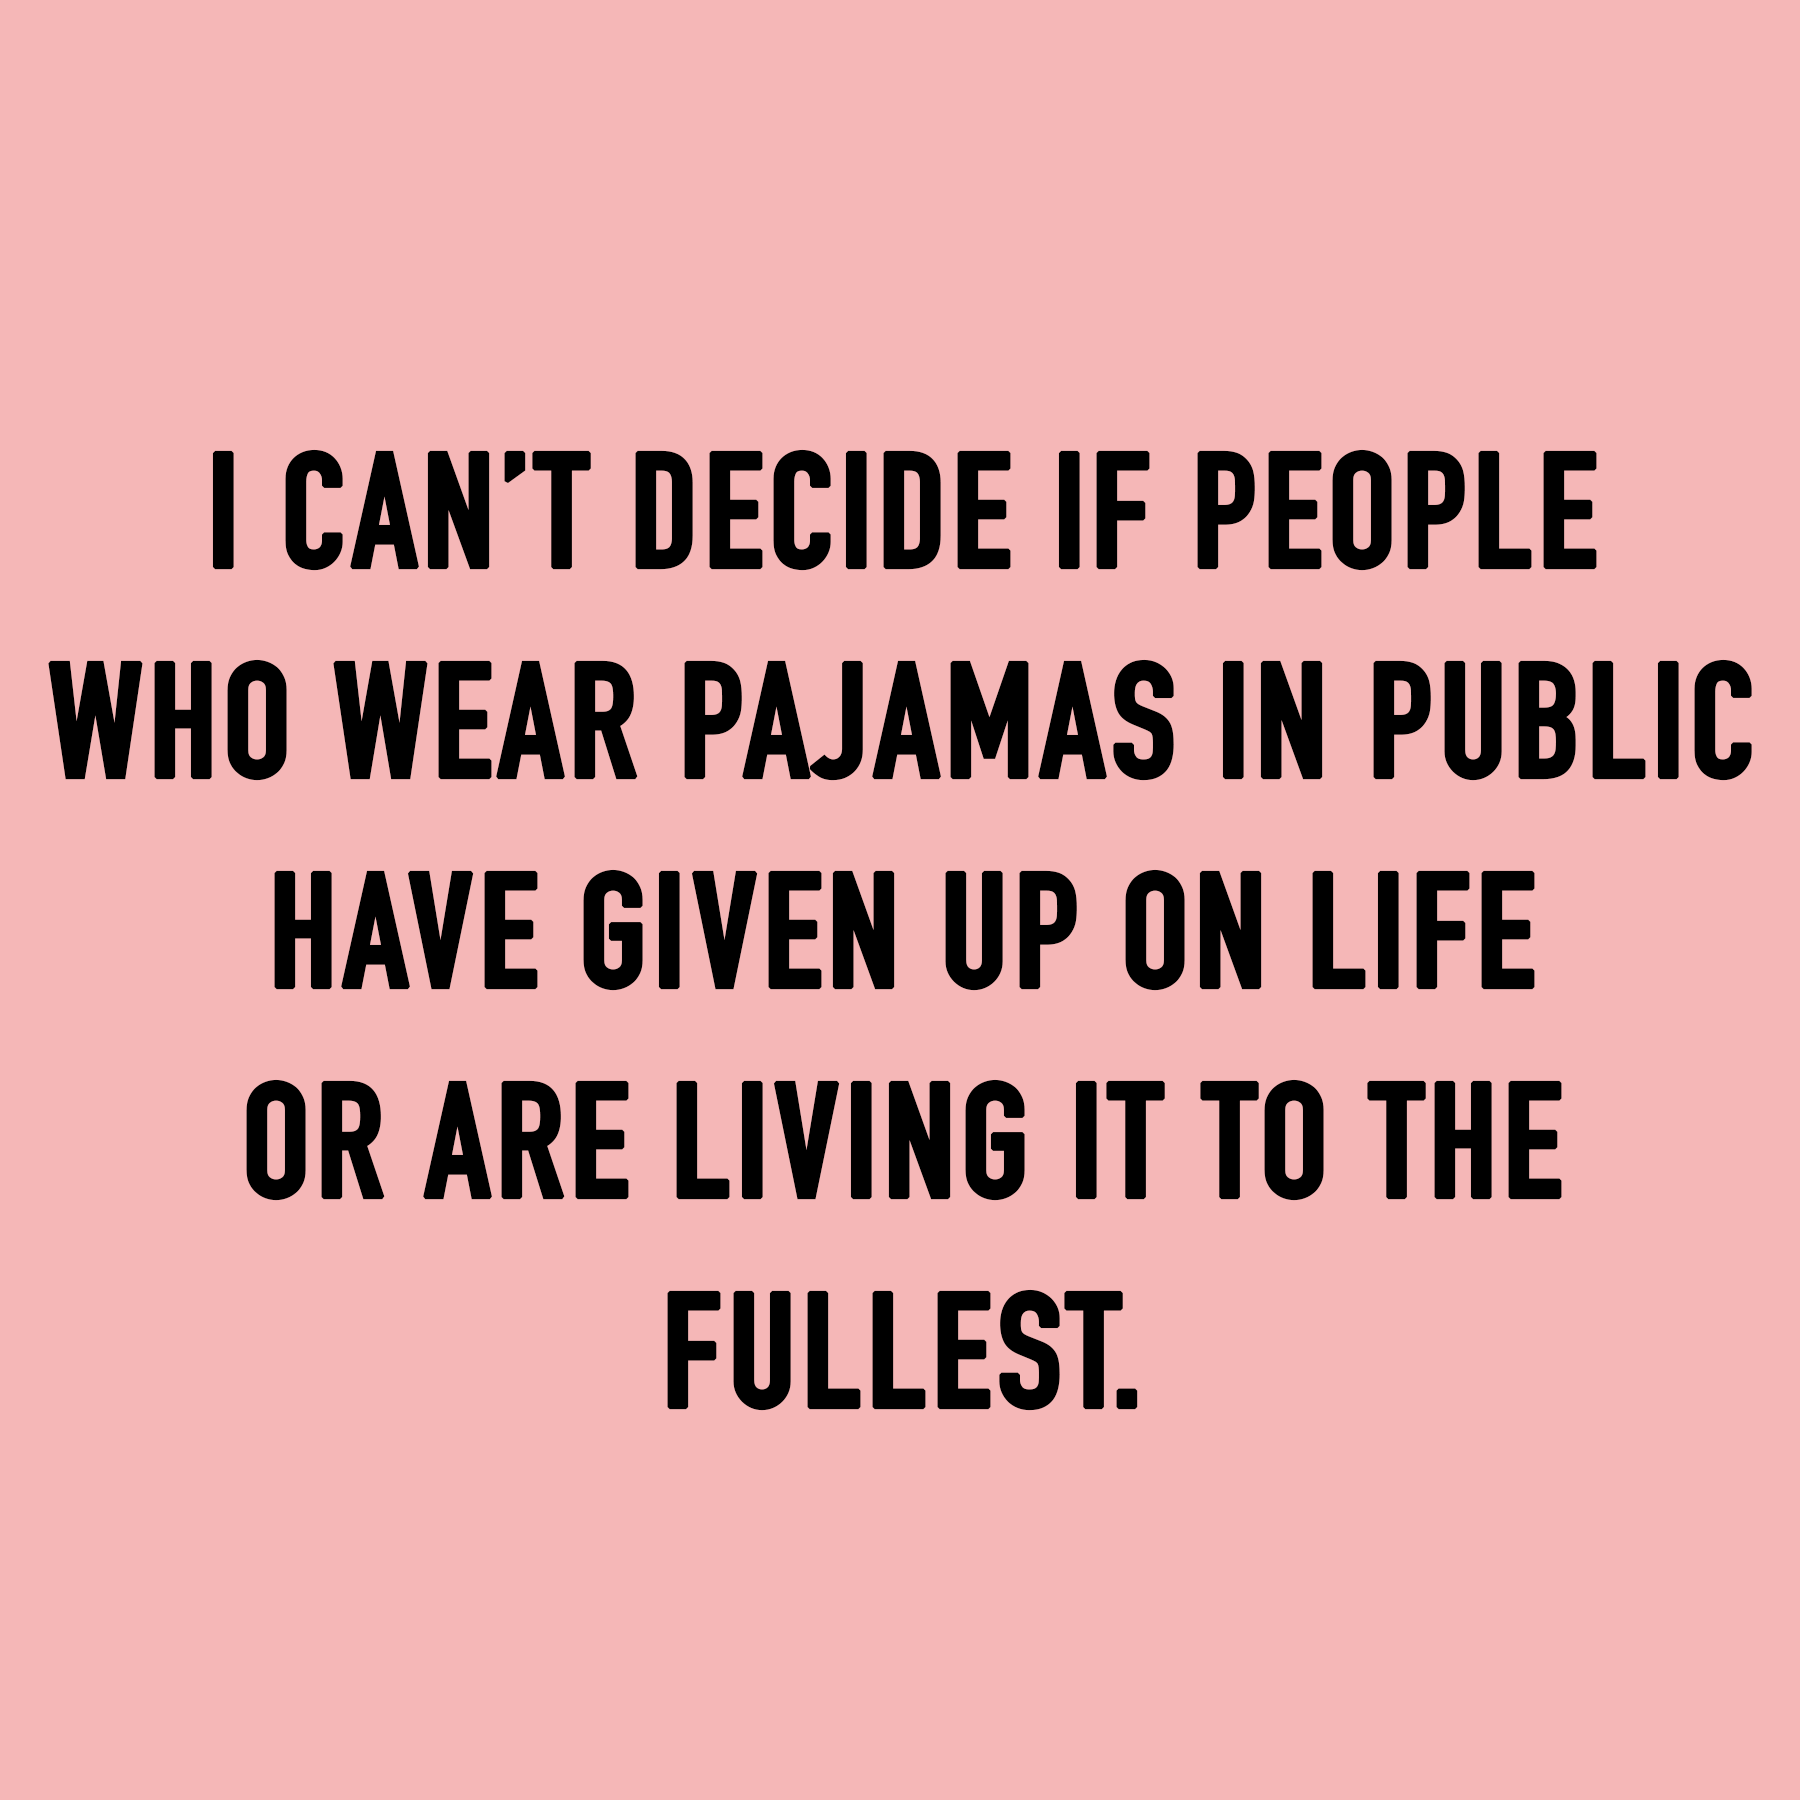 I CAN’T DECIDE IF PEOPLE WHO WEAR PAJAMAS IN PUBLIC HAVE GIVEN UP ON LIFE OR ARE LIVING IT TO THE FULLEST. 